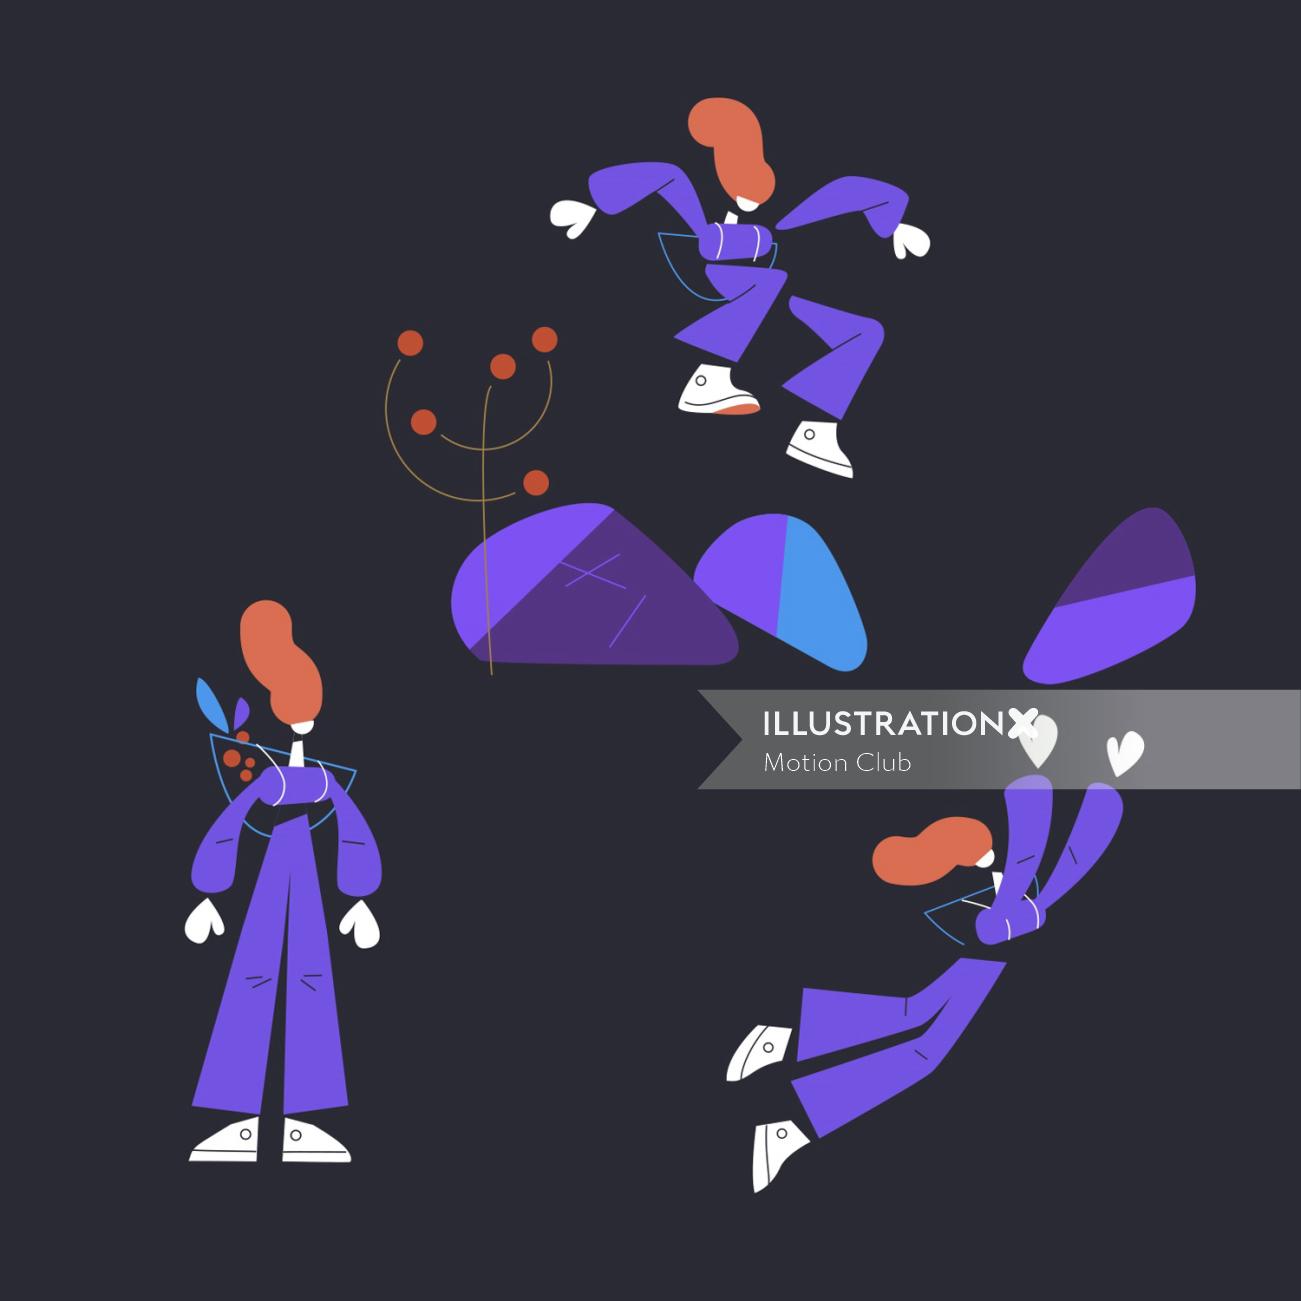 Digital character design by Motion club